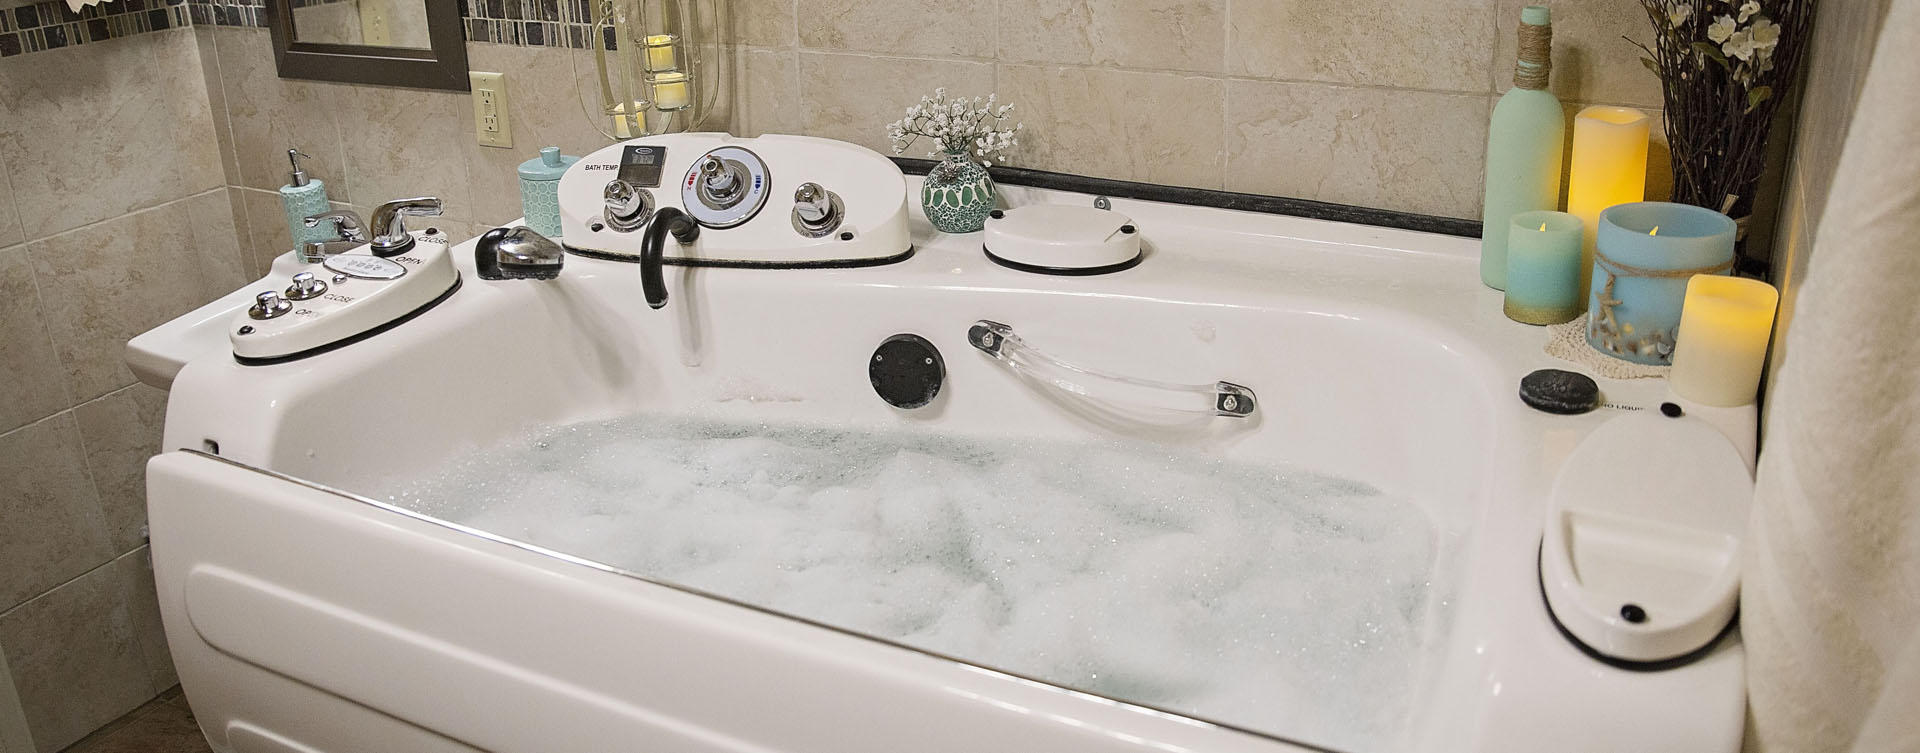 With an easy access design, our whirlpool allows you to enjoy a warm bath safely and comfortably at Bickford of Grand Island